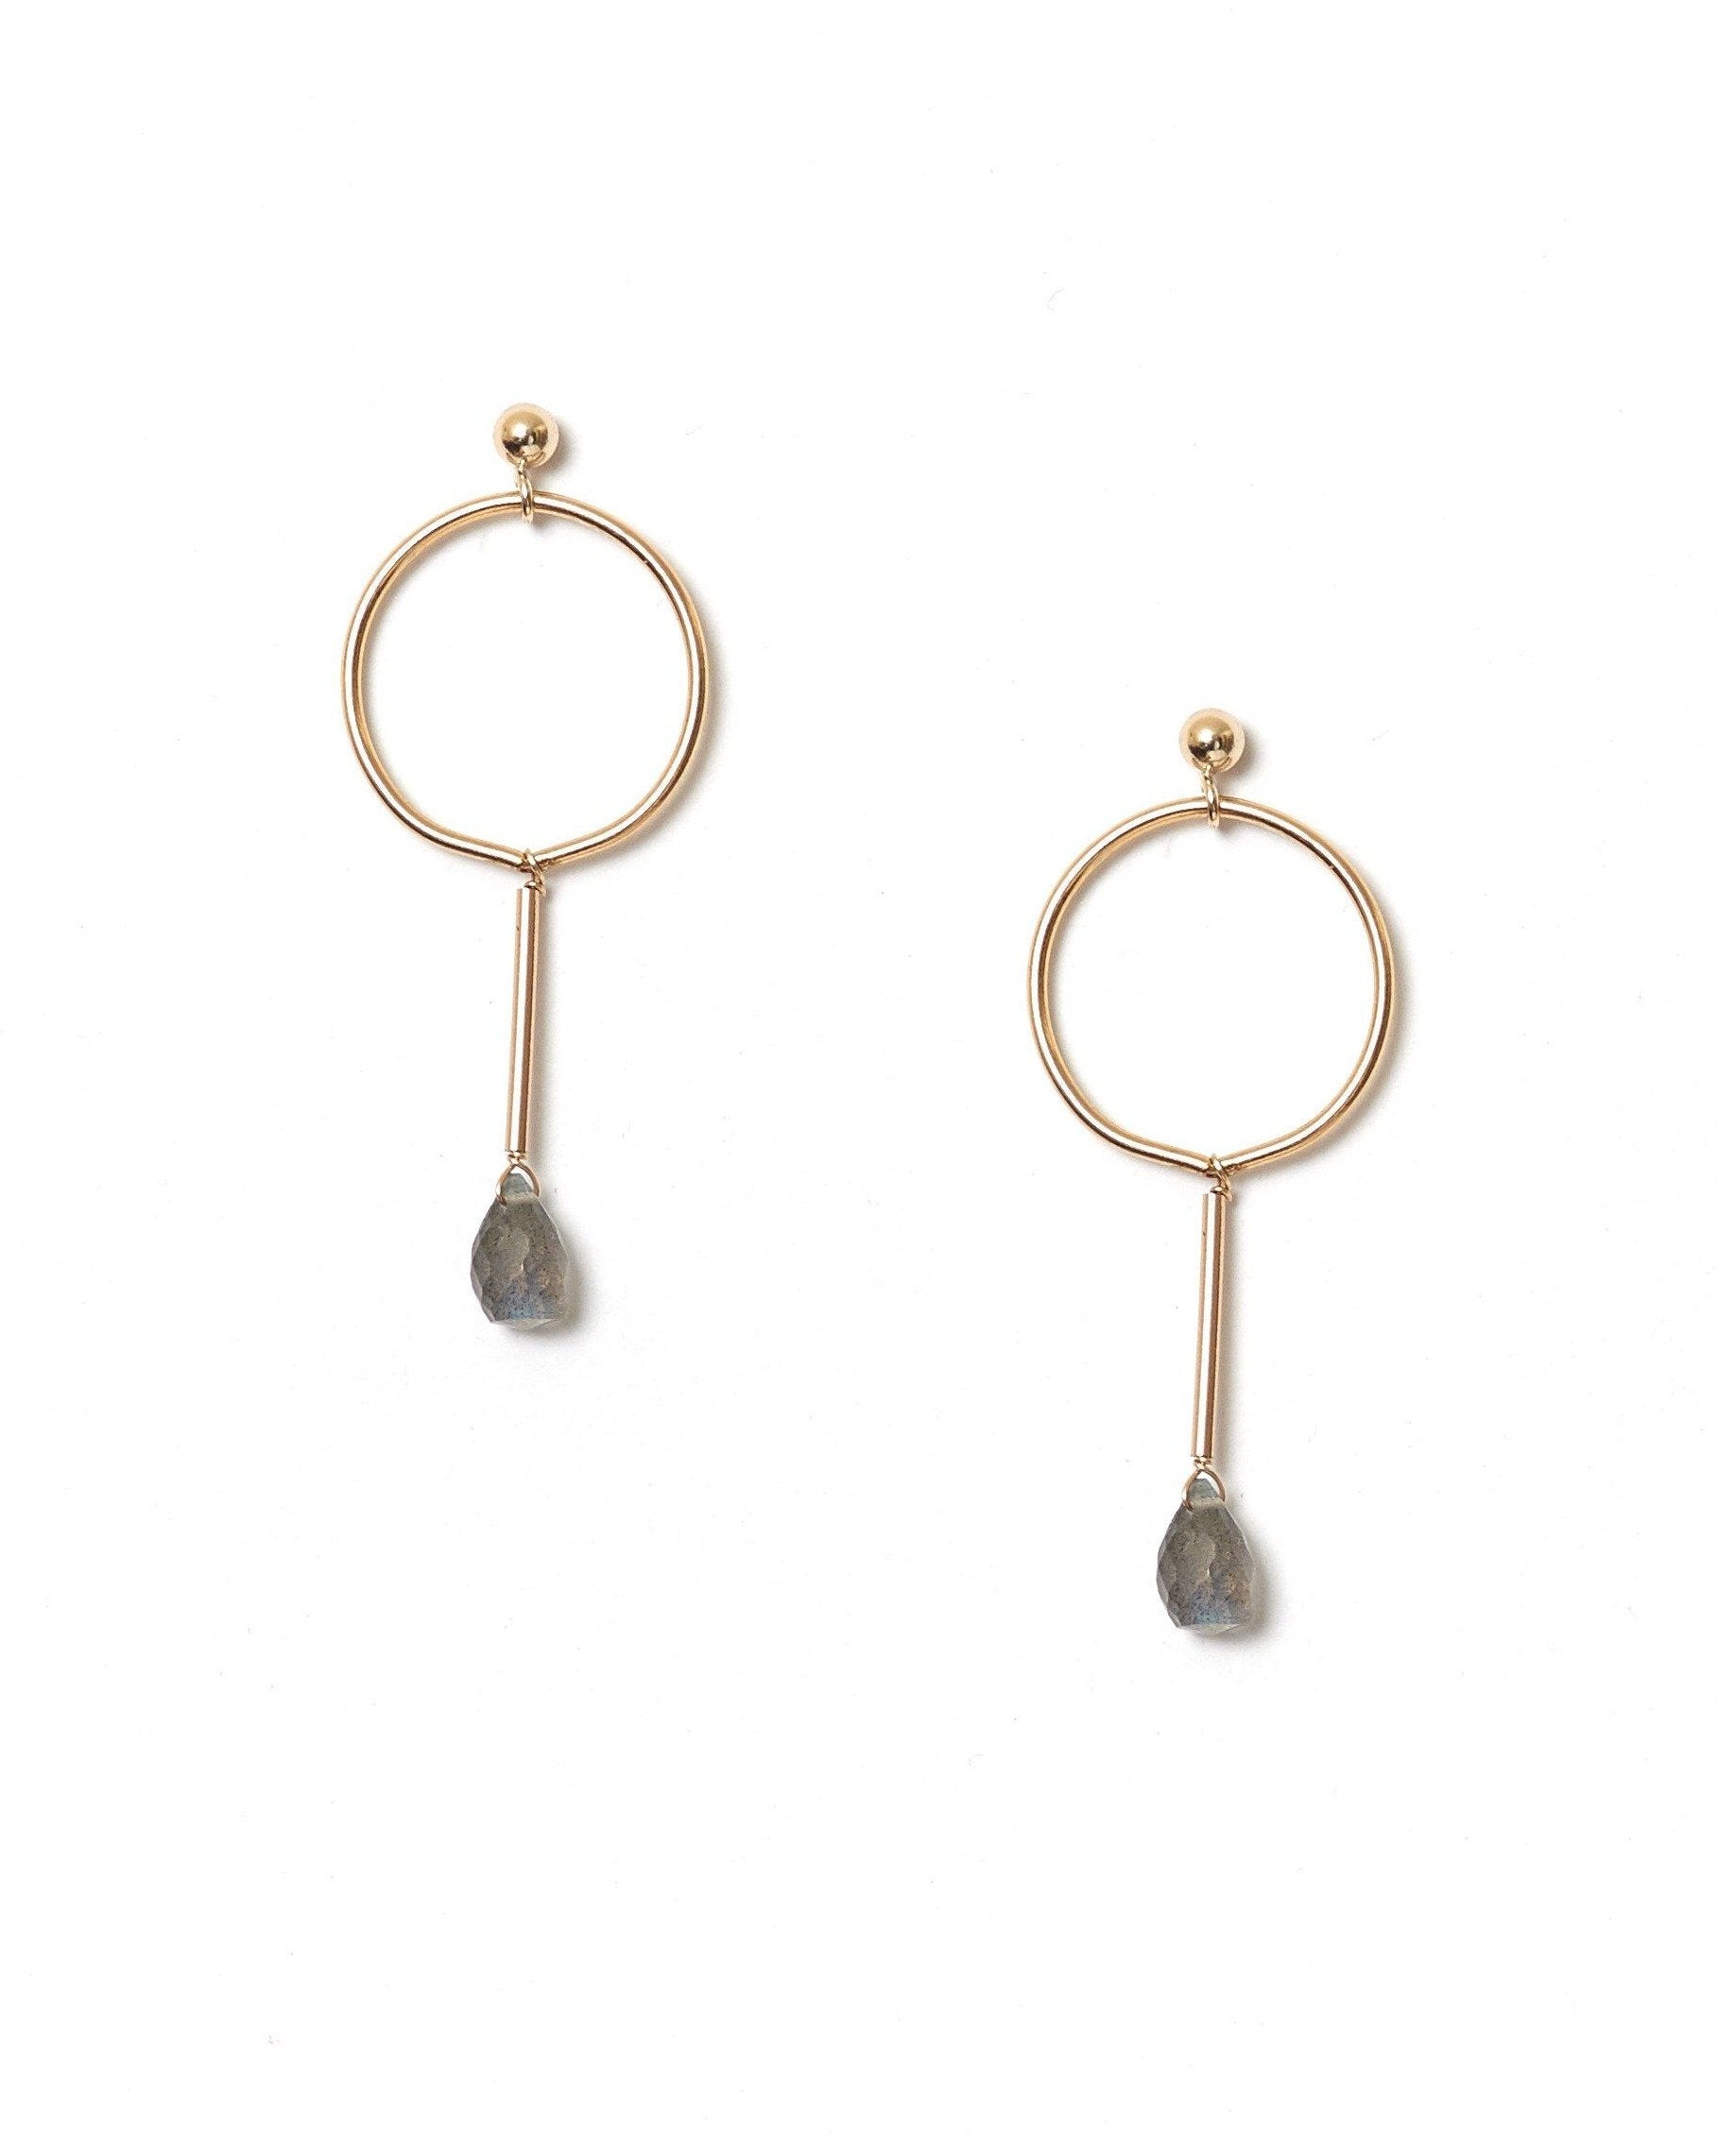 Osea Earrings by KOZAKH. Ball stud drop earrings in 14K Gold Filled, featuring a faceted Labradorite droplet.